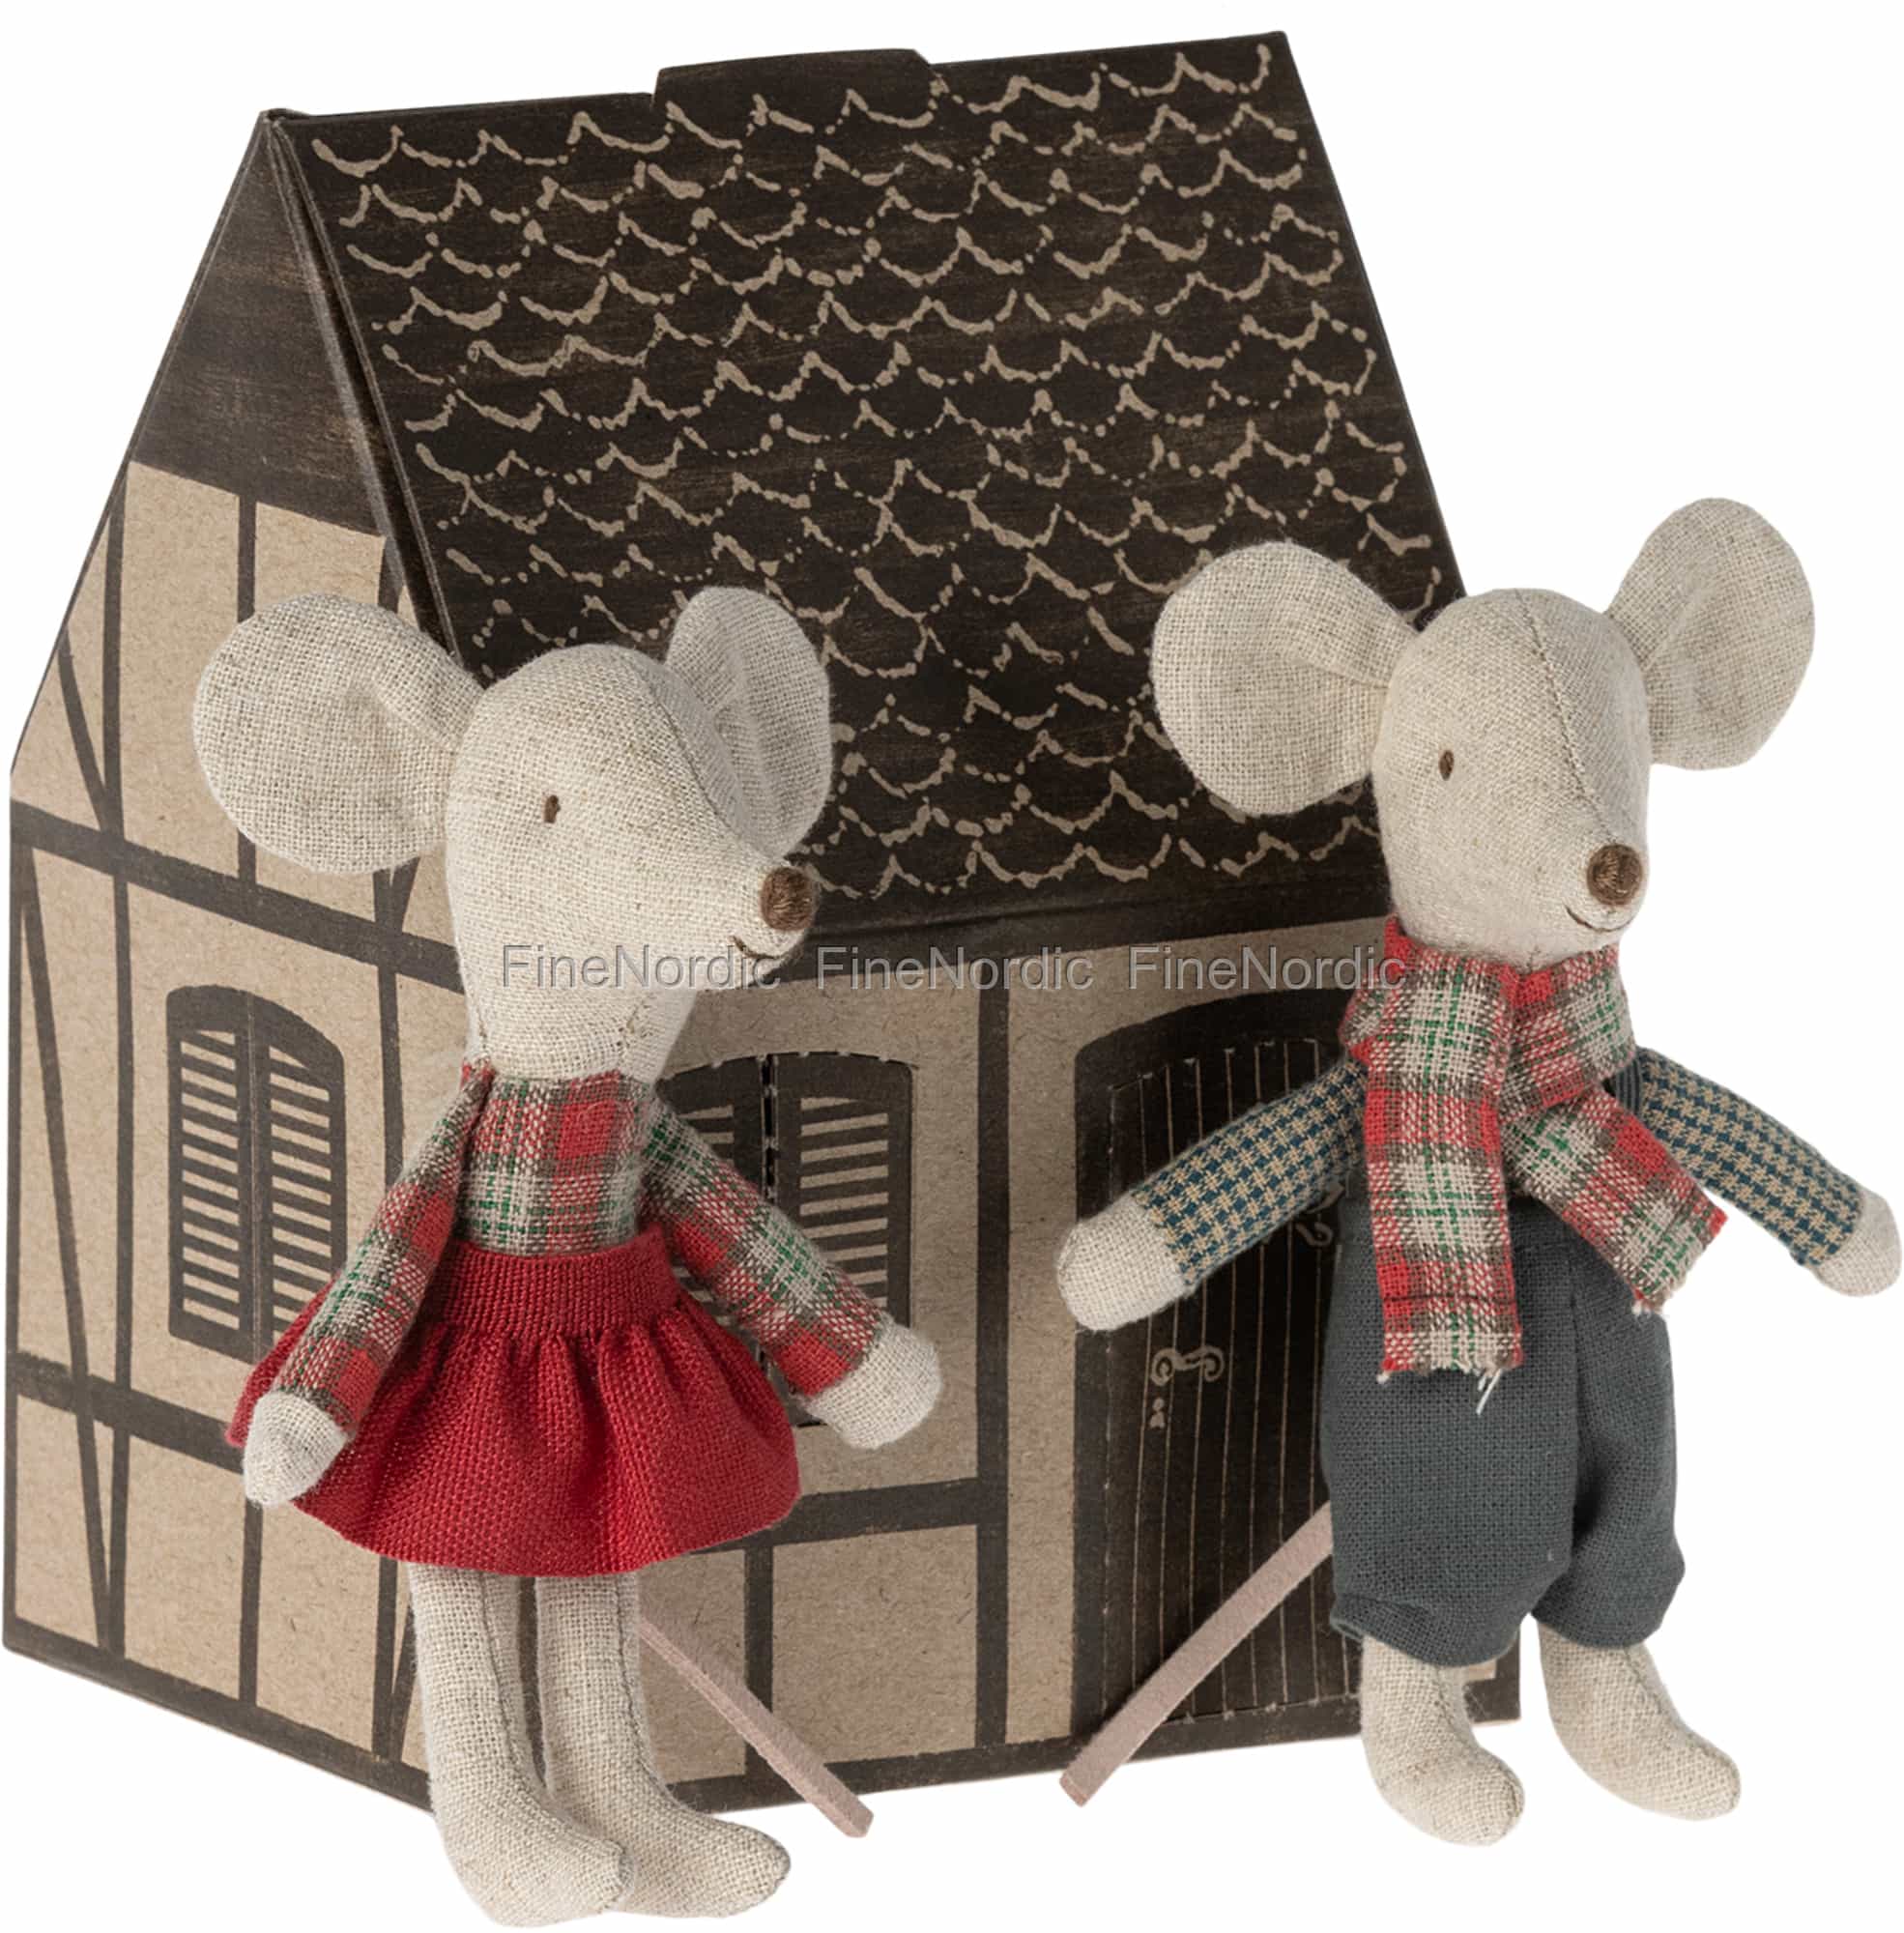 https://images.finenordic.com/image/73891-large-1690187165/maileg-winter-mice-twins-little-brother-and-sister-with-house.jpg